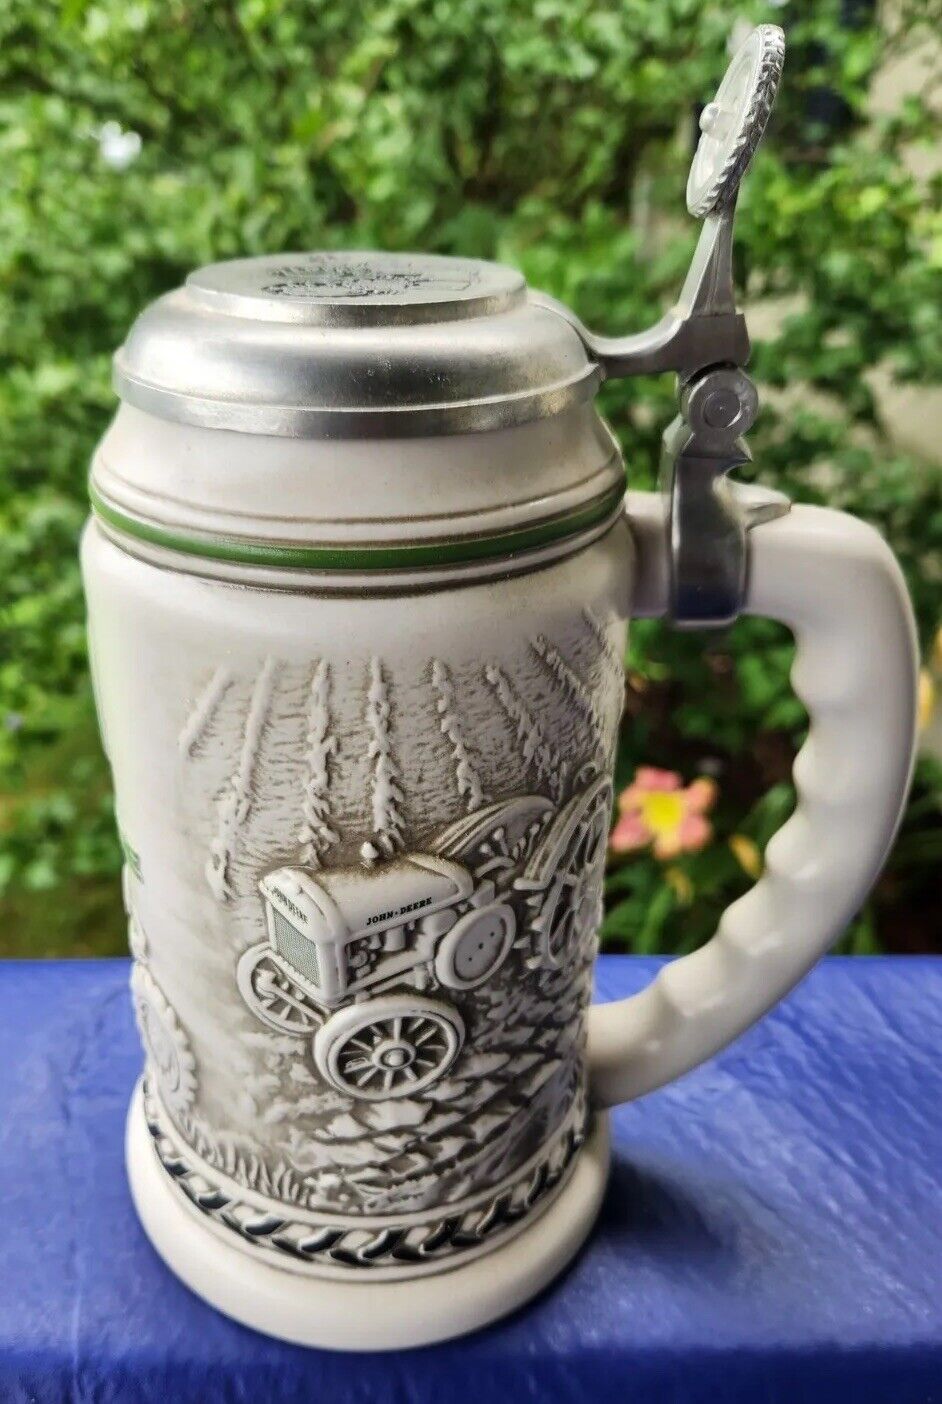 2003 John Deere Collectible Stein Made In Brazil Exclusively For Avon